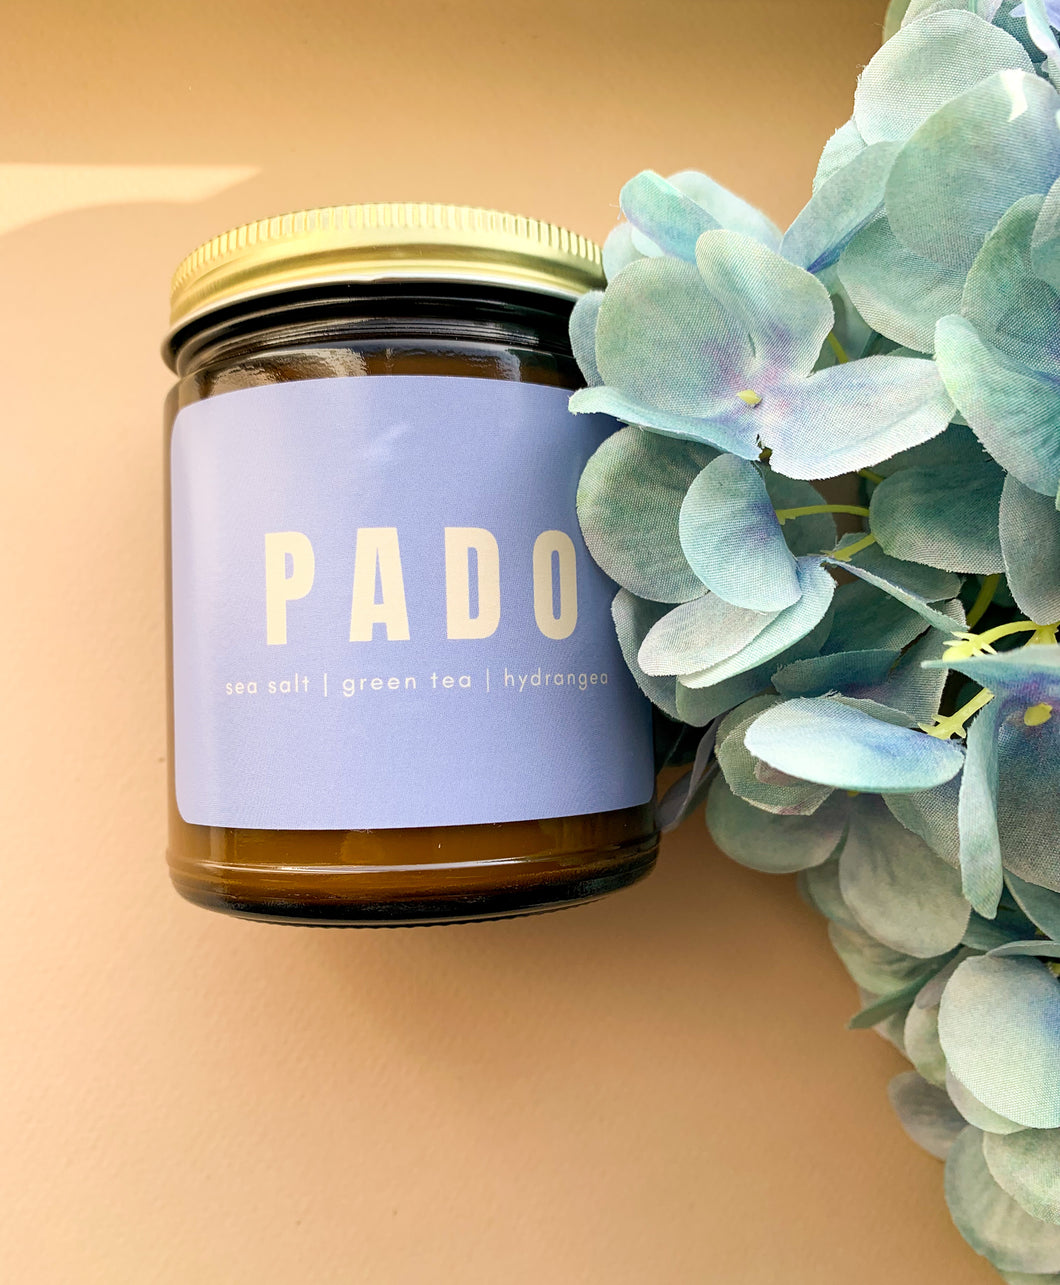 PADO - asian inspired soy wax scented candle - floral, sweet, soapy scented candle